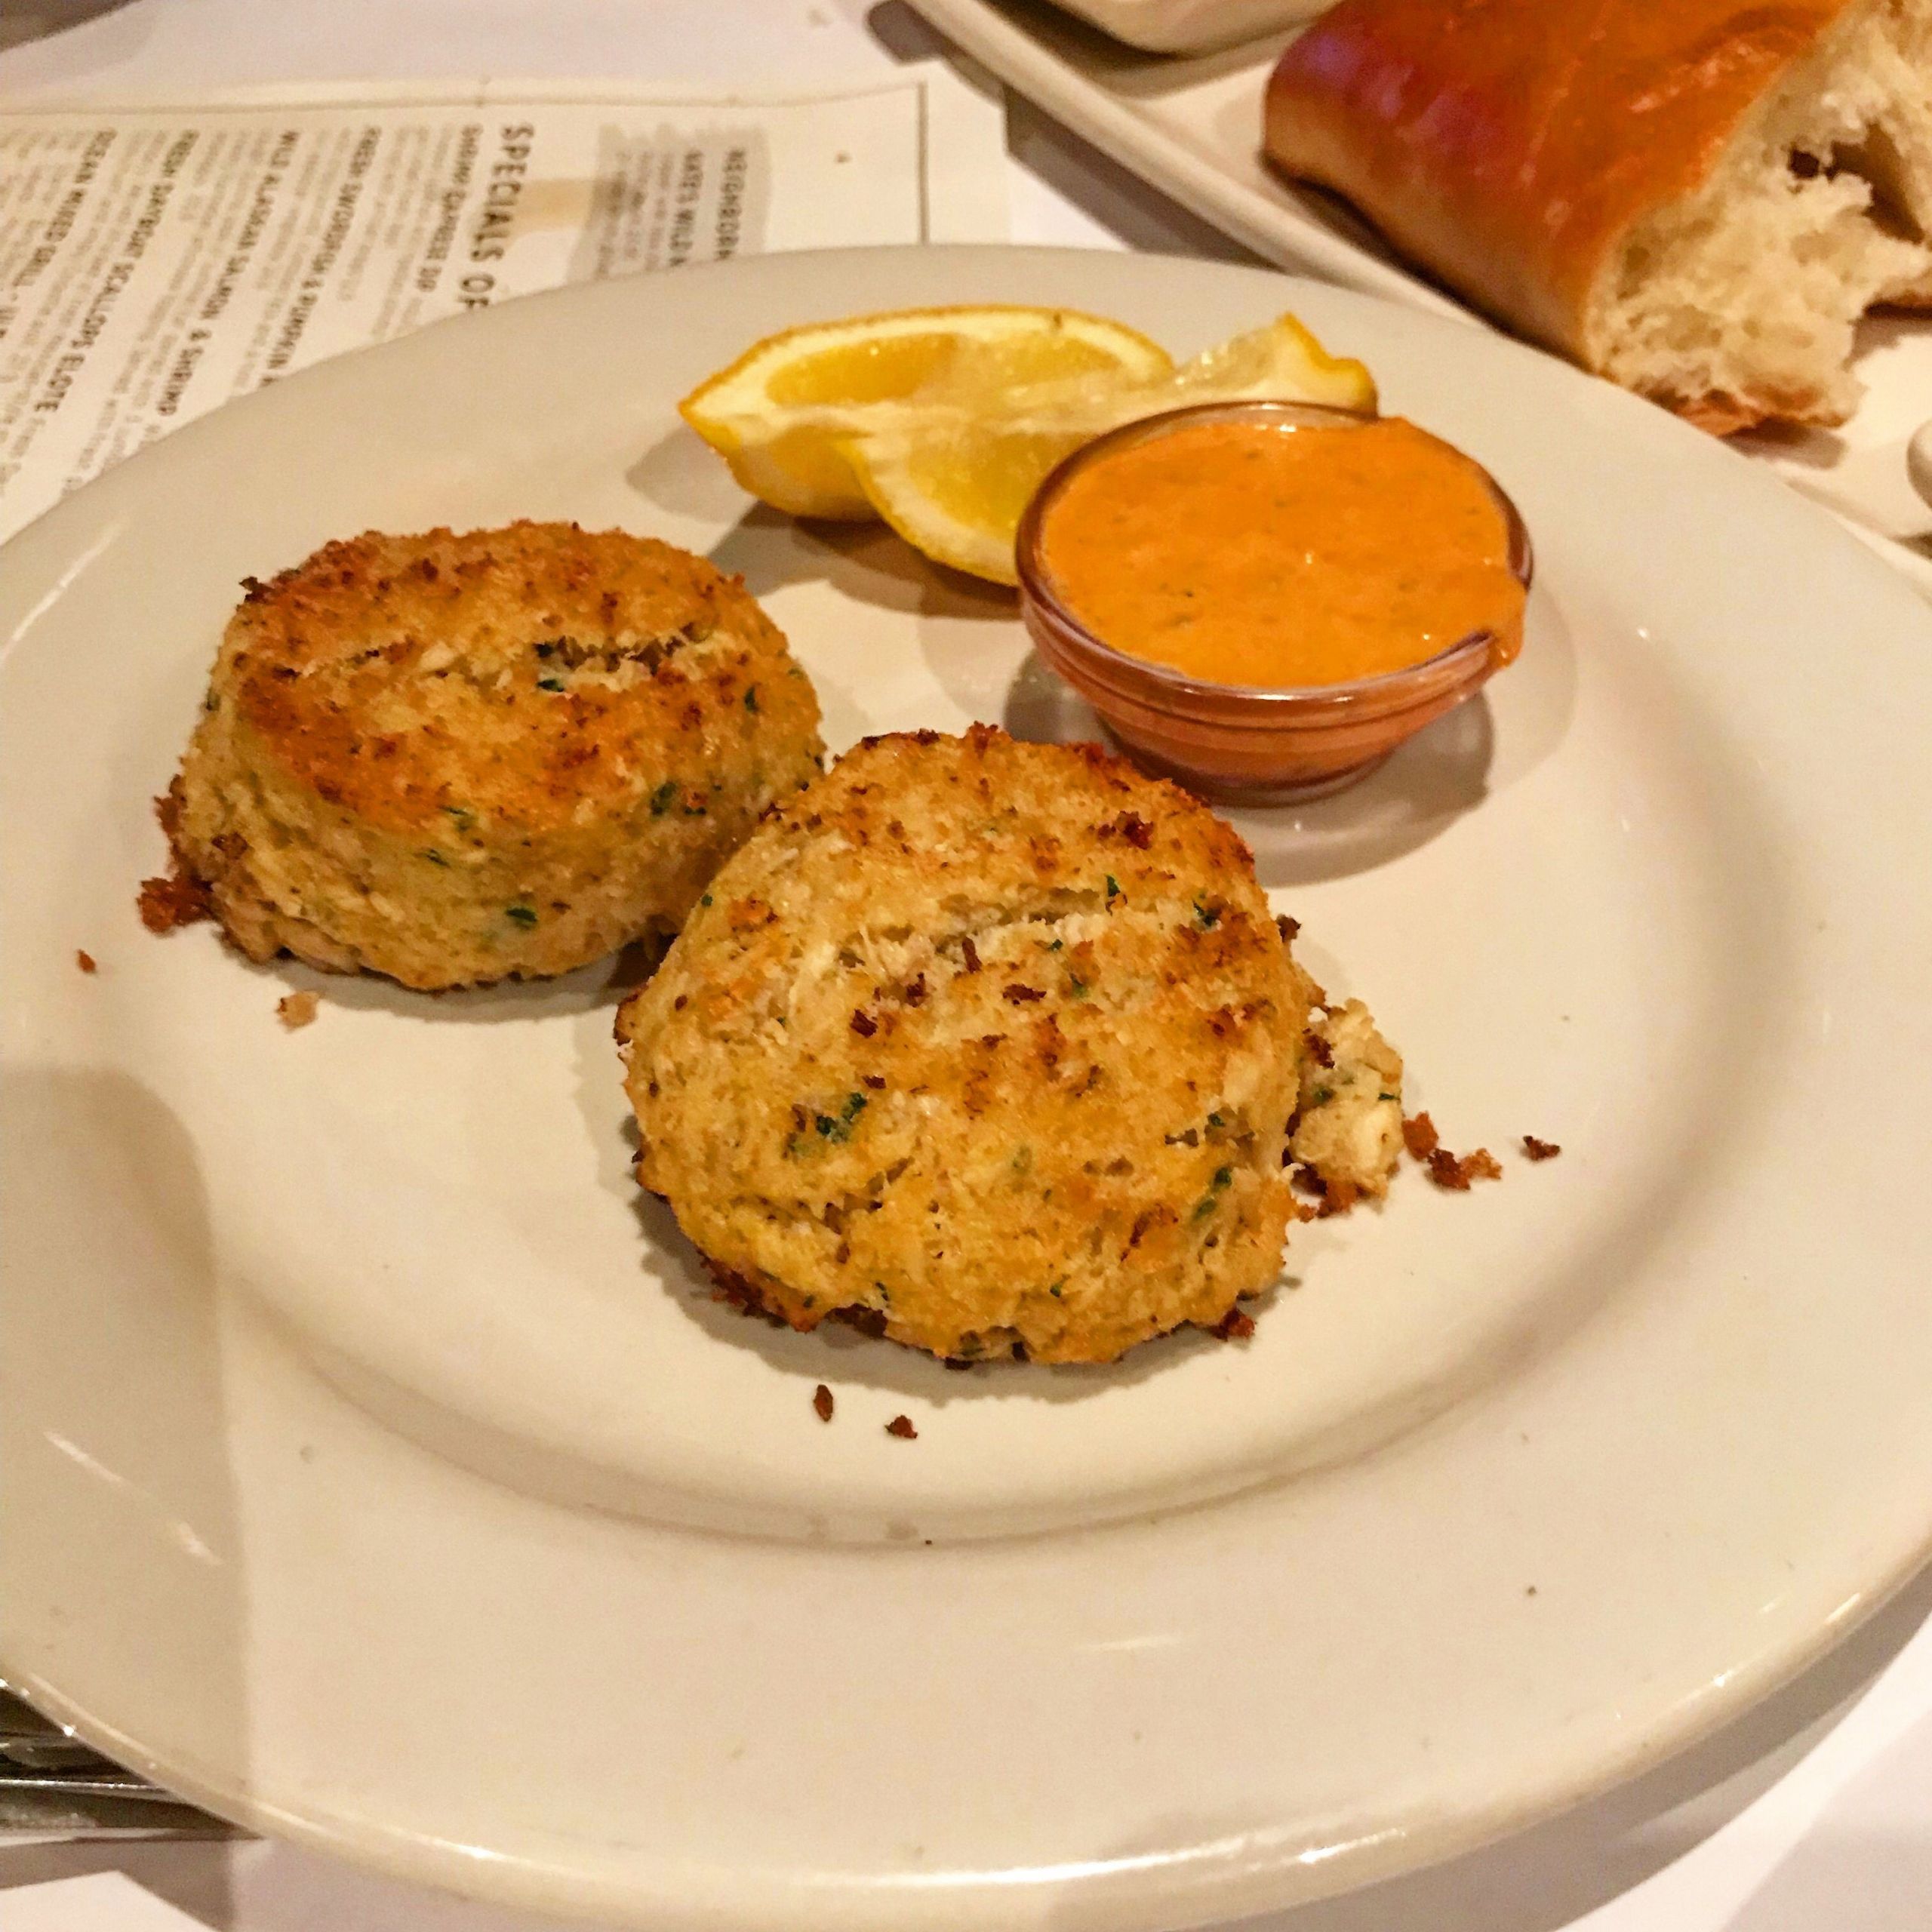 Bonefish Grill Maryland Crab Cakes
 The Maryland crabcakes are delicious Food hungry